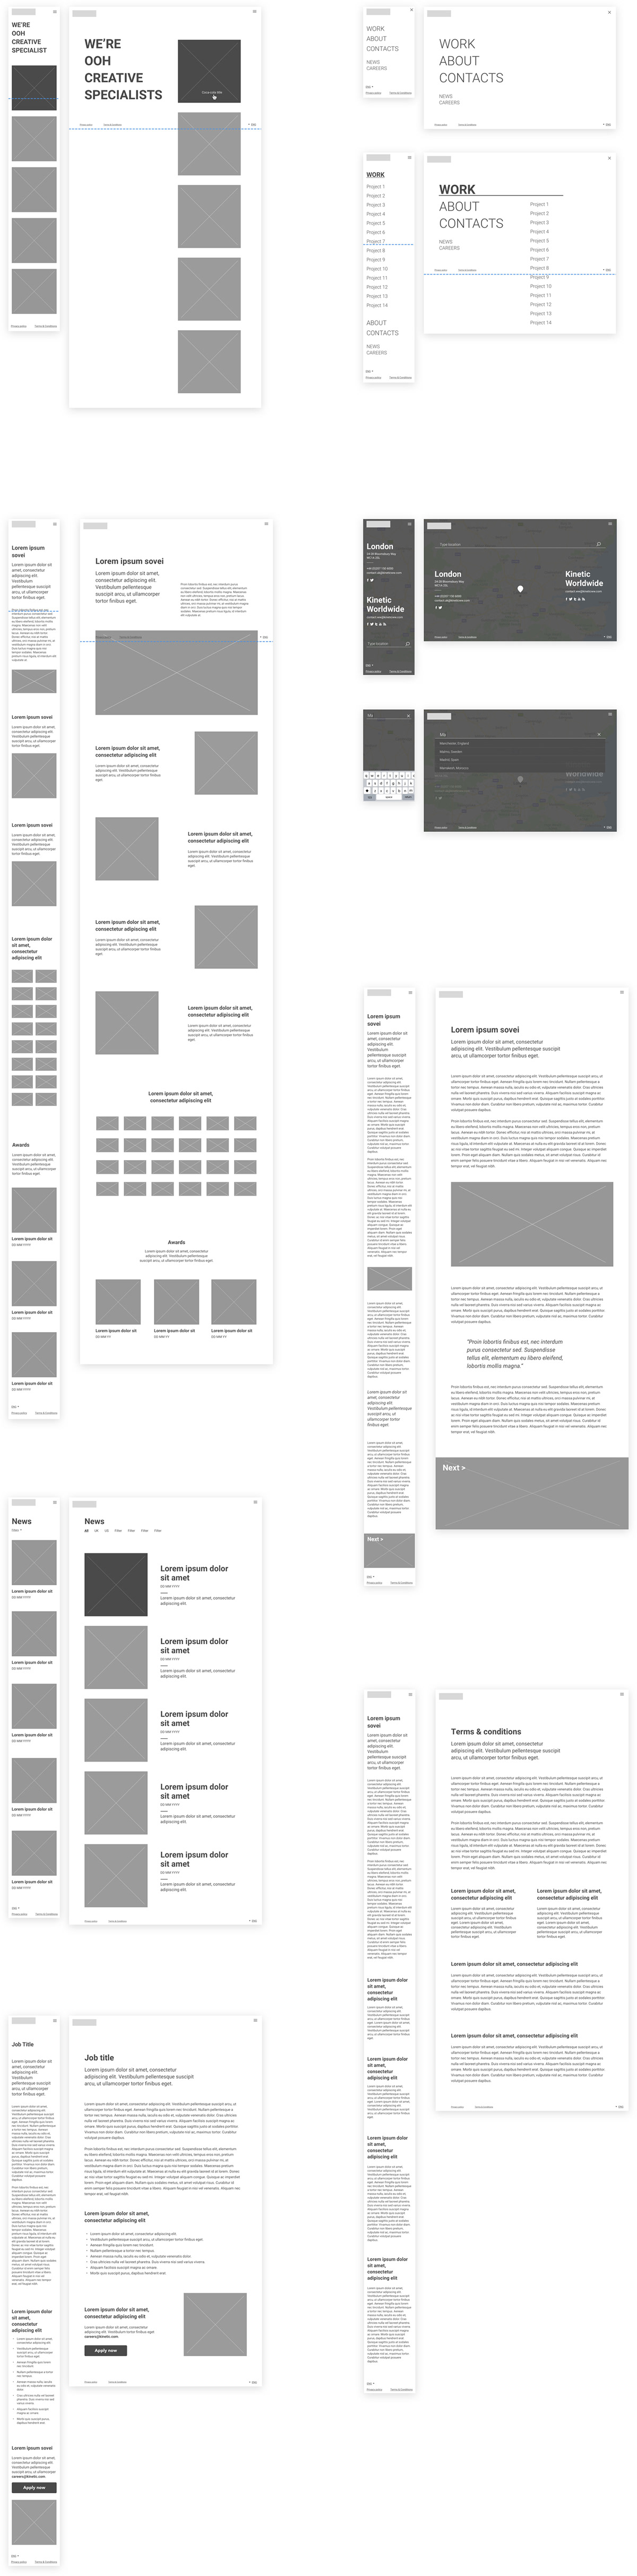 Adobe Portfolio User research content analysis kinetic Bookmark Content user experience ux user testing Surveys interviews personas competitors analysis card sorting Sitemap ia information architecture  wireframes sketches